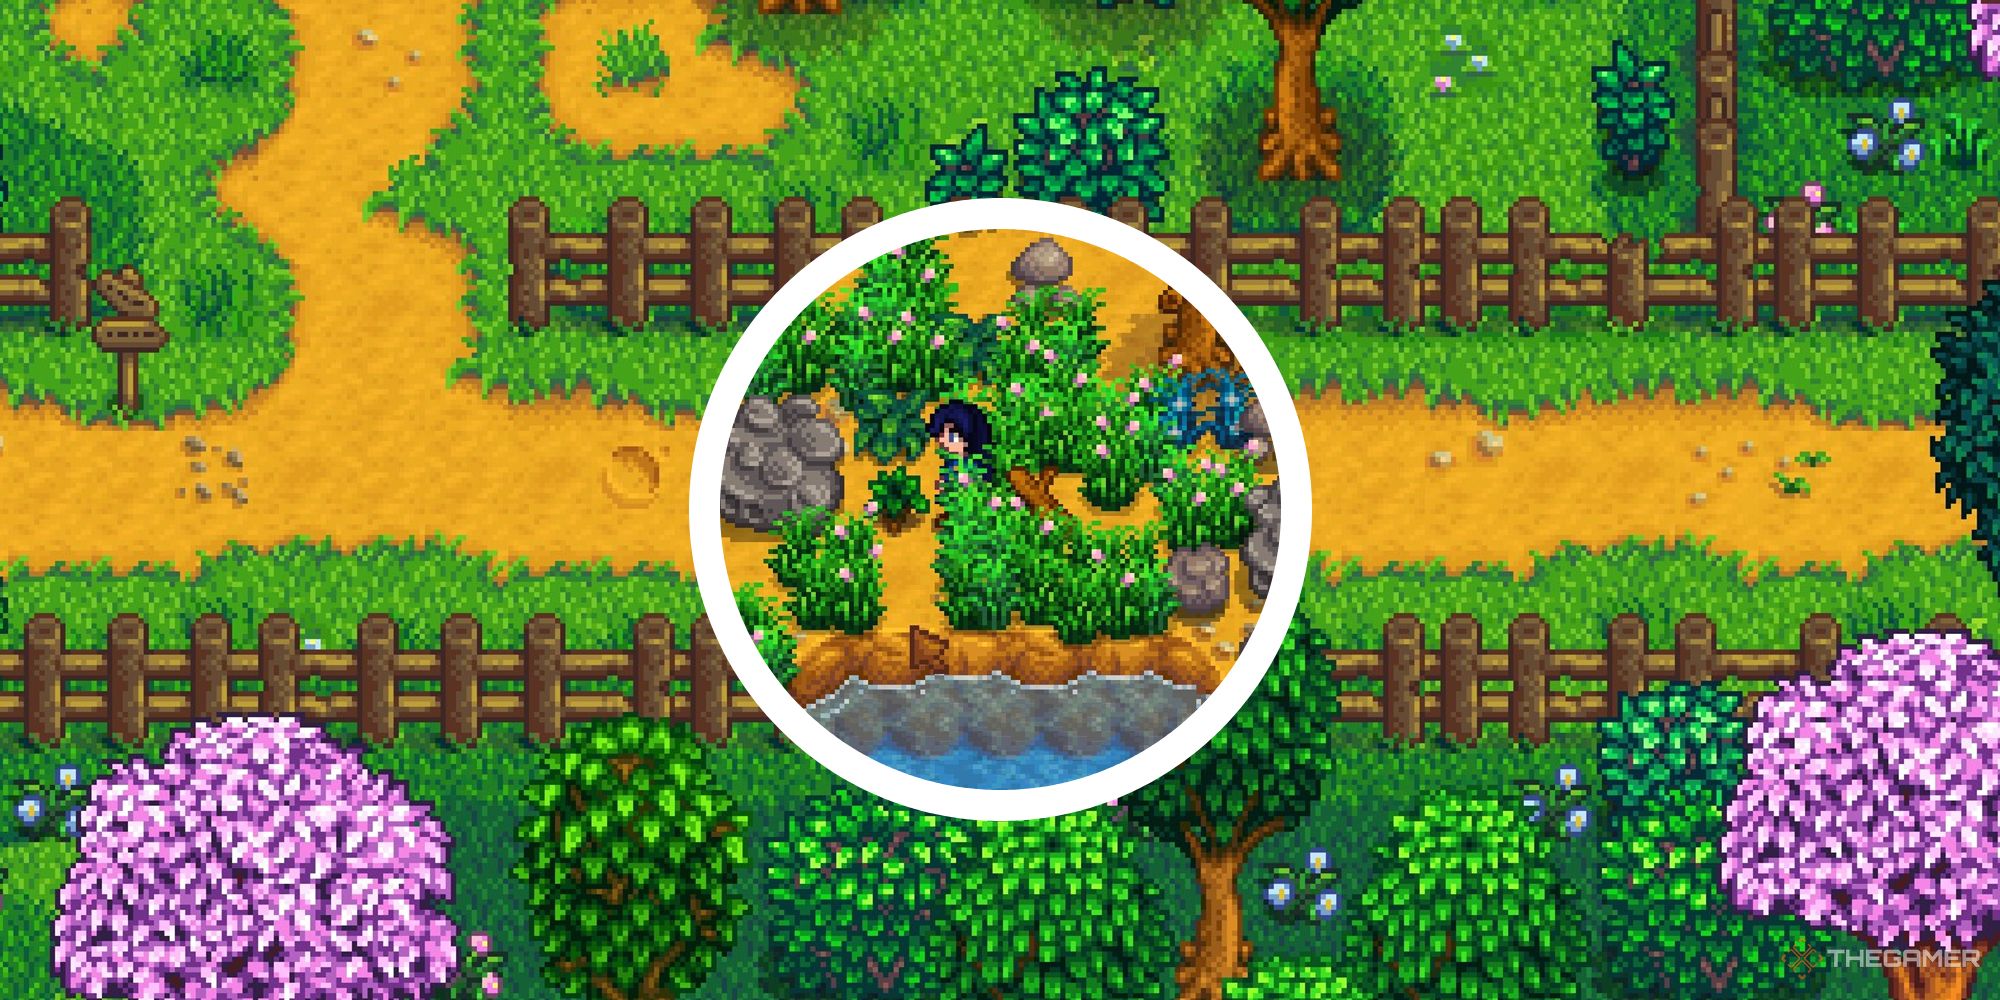 stardew valley image of bus stop area path with circle image of player standing in grass on far-1